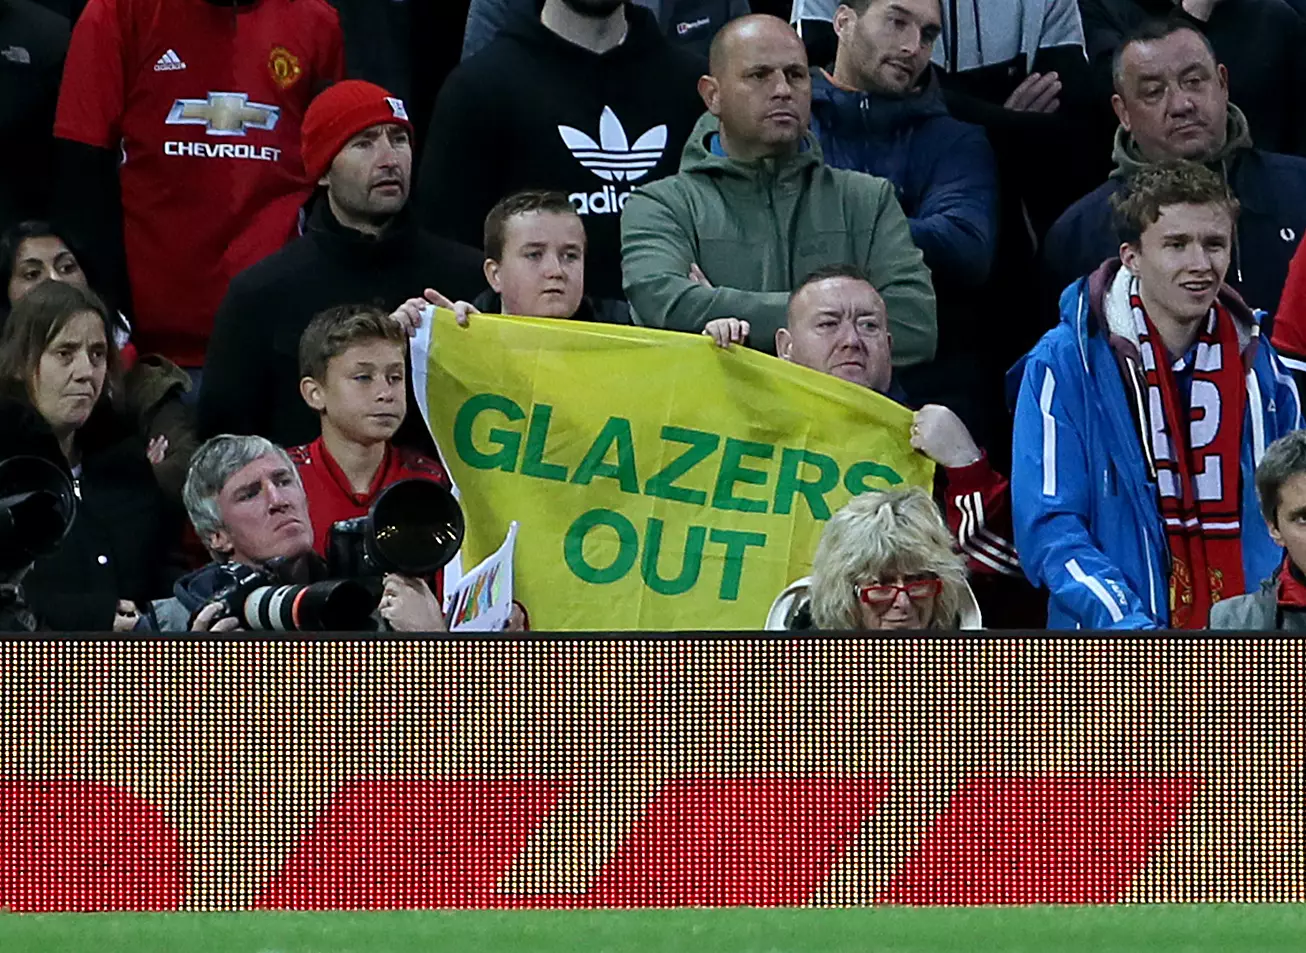 The Glazers have never been popular amongst United fans. How will they react to a Saudi takeover?